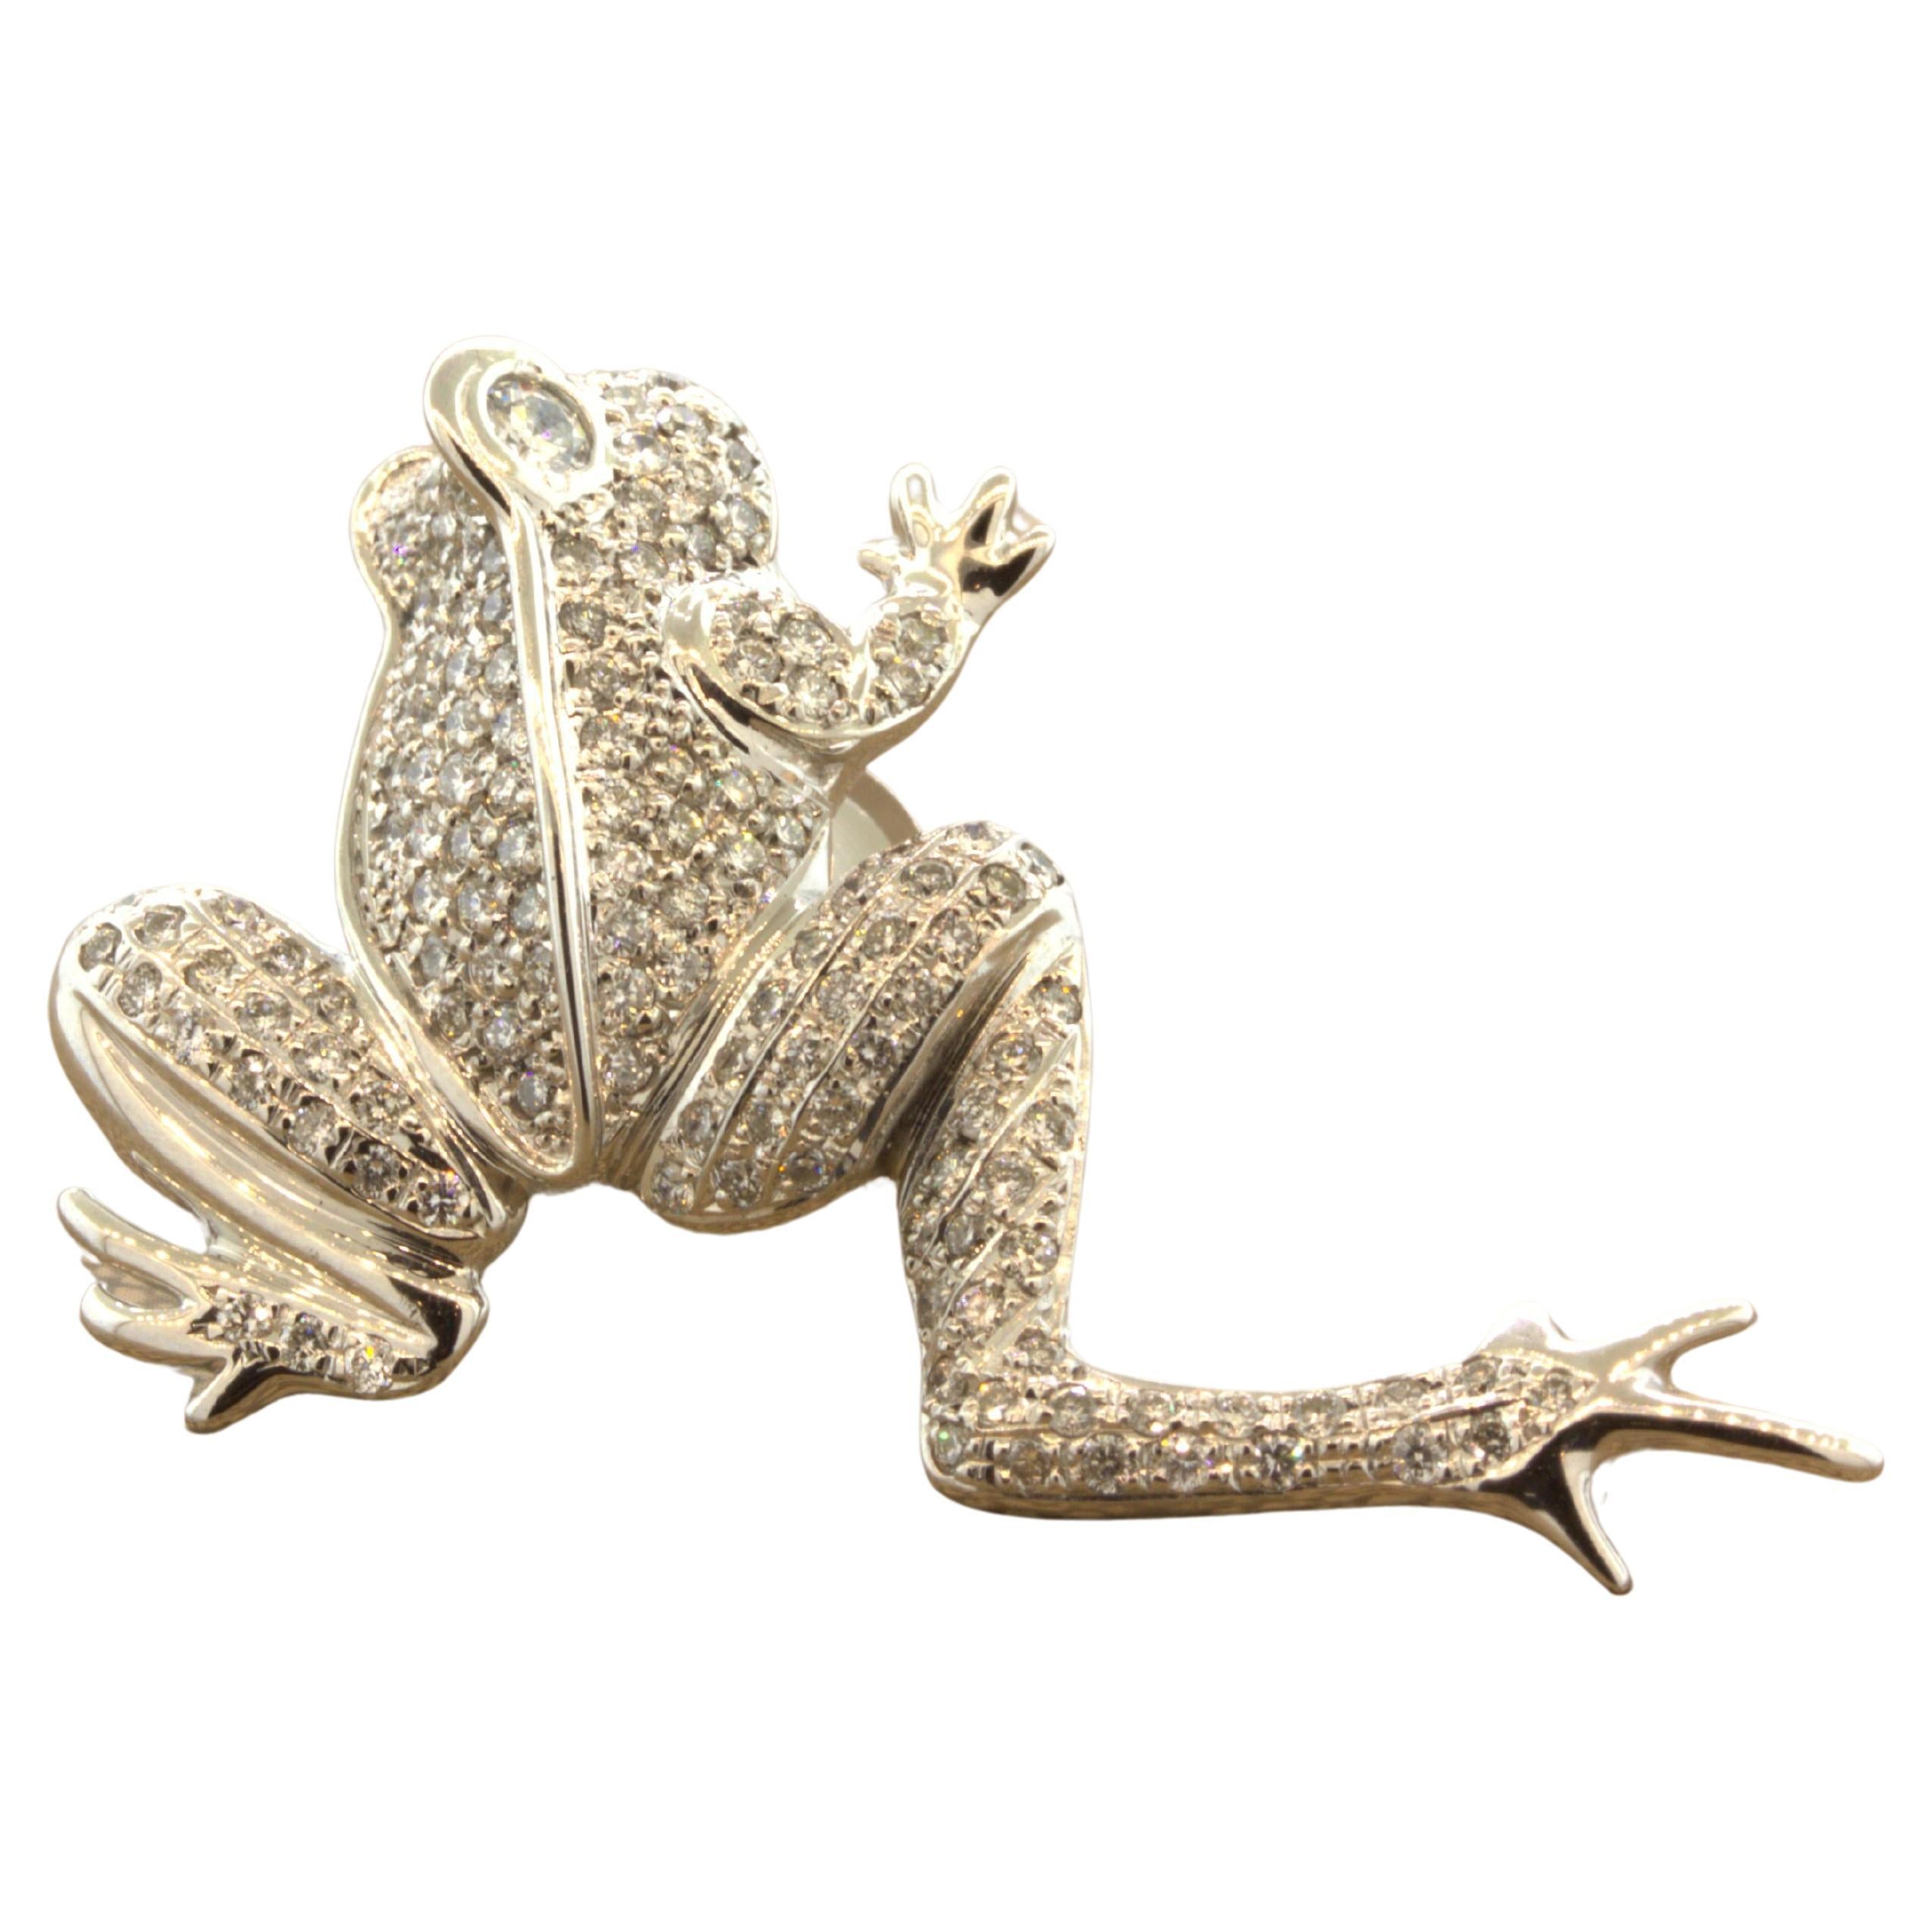 A sweet and stylish pin featuring a leaping frog! The piece features 1.04 carats of round brilliant-cut diamonds set across the frog’s legs, arms and body giving it great brilliance and sparkle. Made in 18k white gold and ready to be worn.

Length: